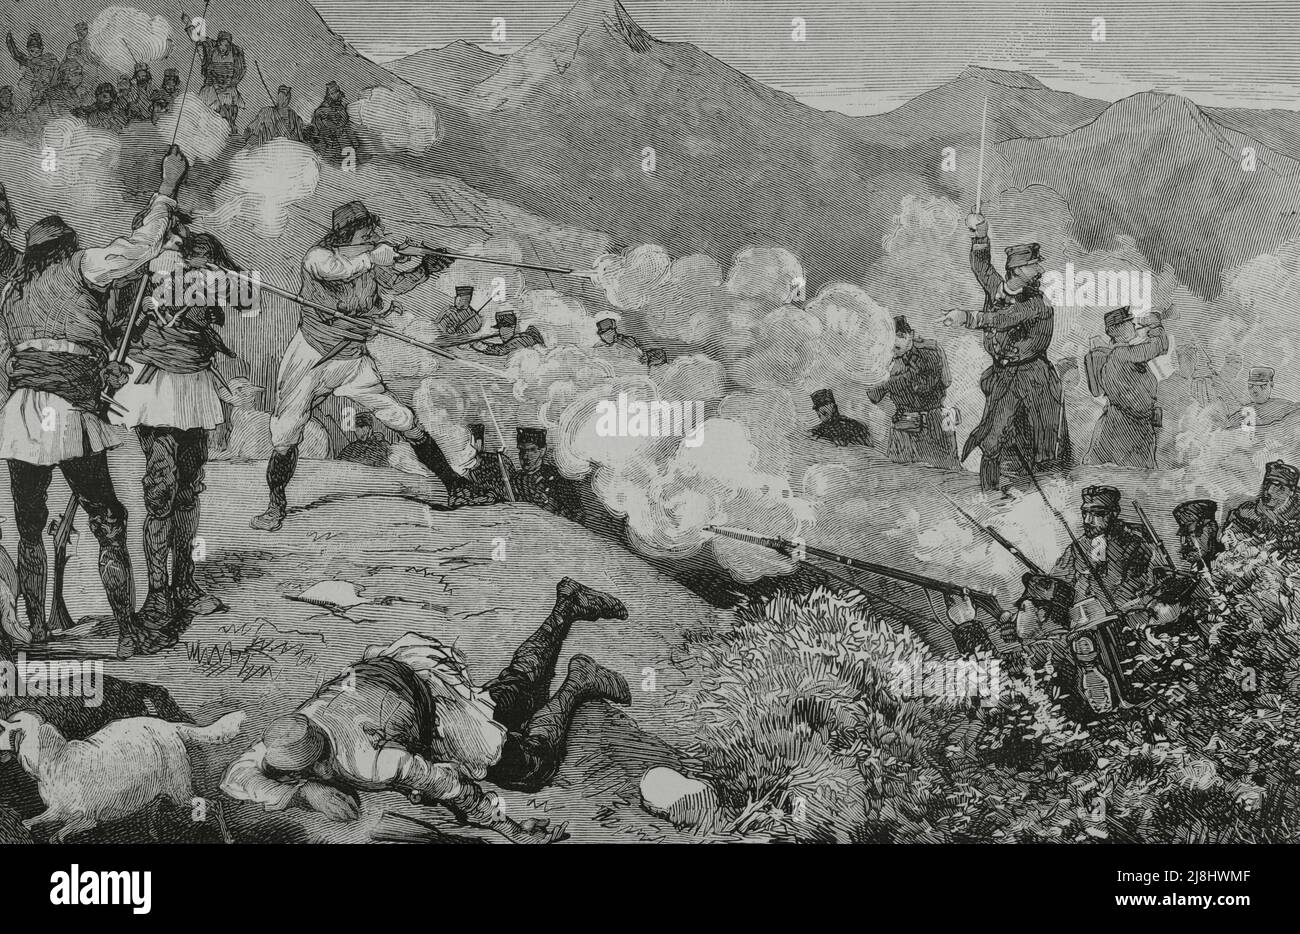 Austro-Hungarian campaign to occupy the former Ottoman territories of the Bosnian Waliate. Dalmatian-Herzegovinian insurrection. Combat on the Zagoria mountains between insurgents and Austrian troops. Engraving by Capuz, 1882. Stock Photo